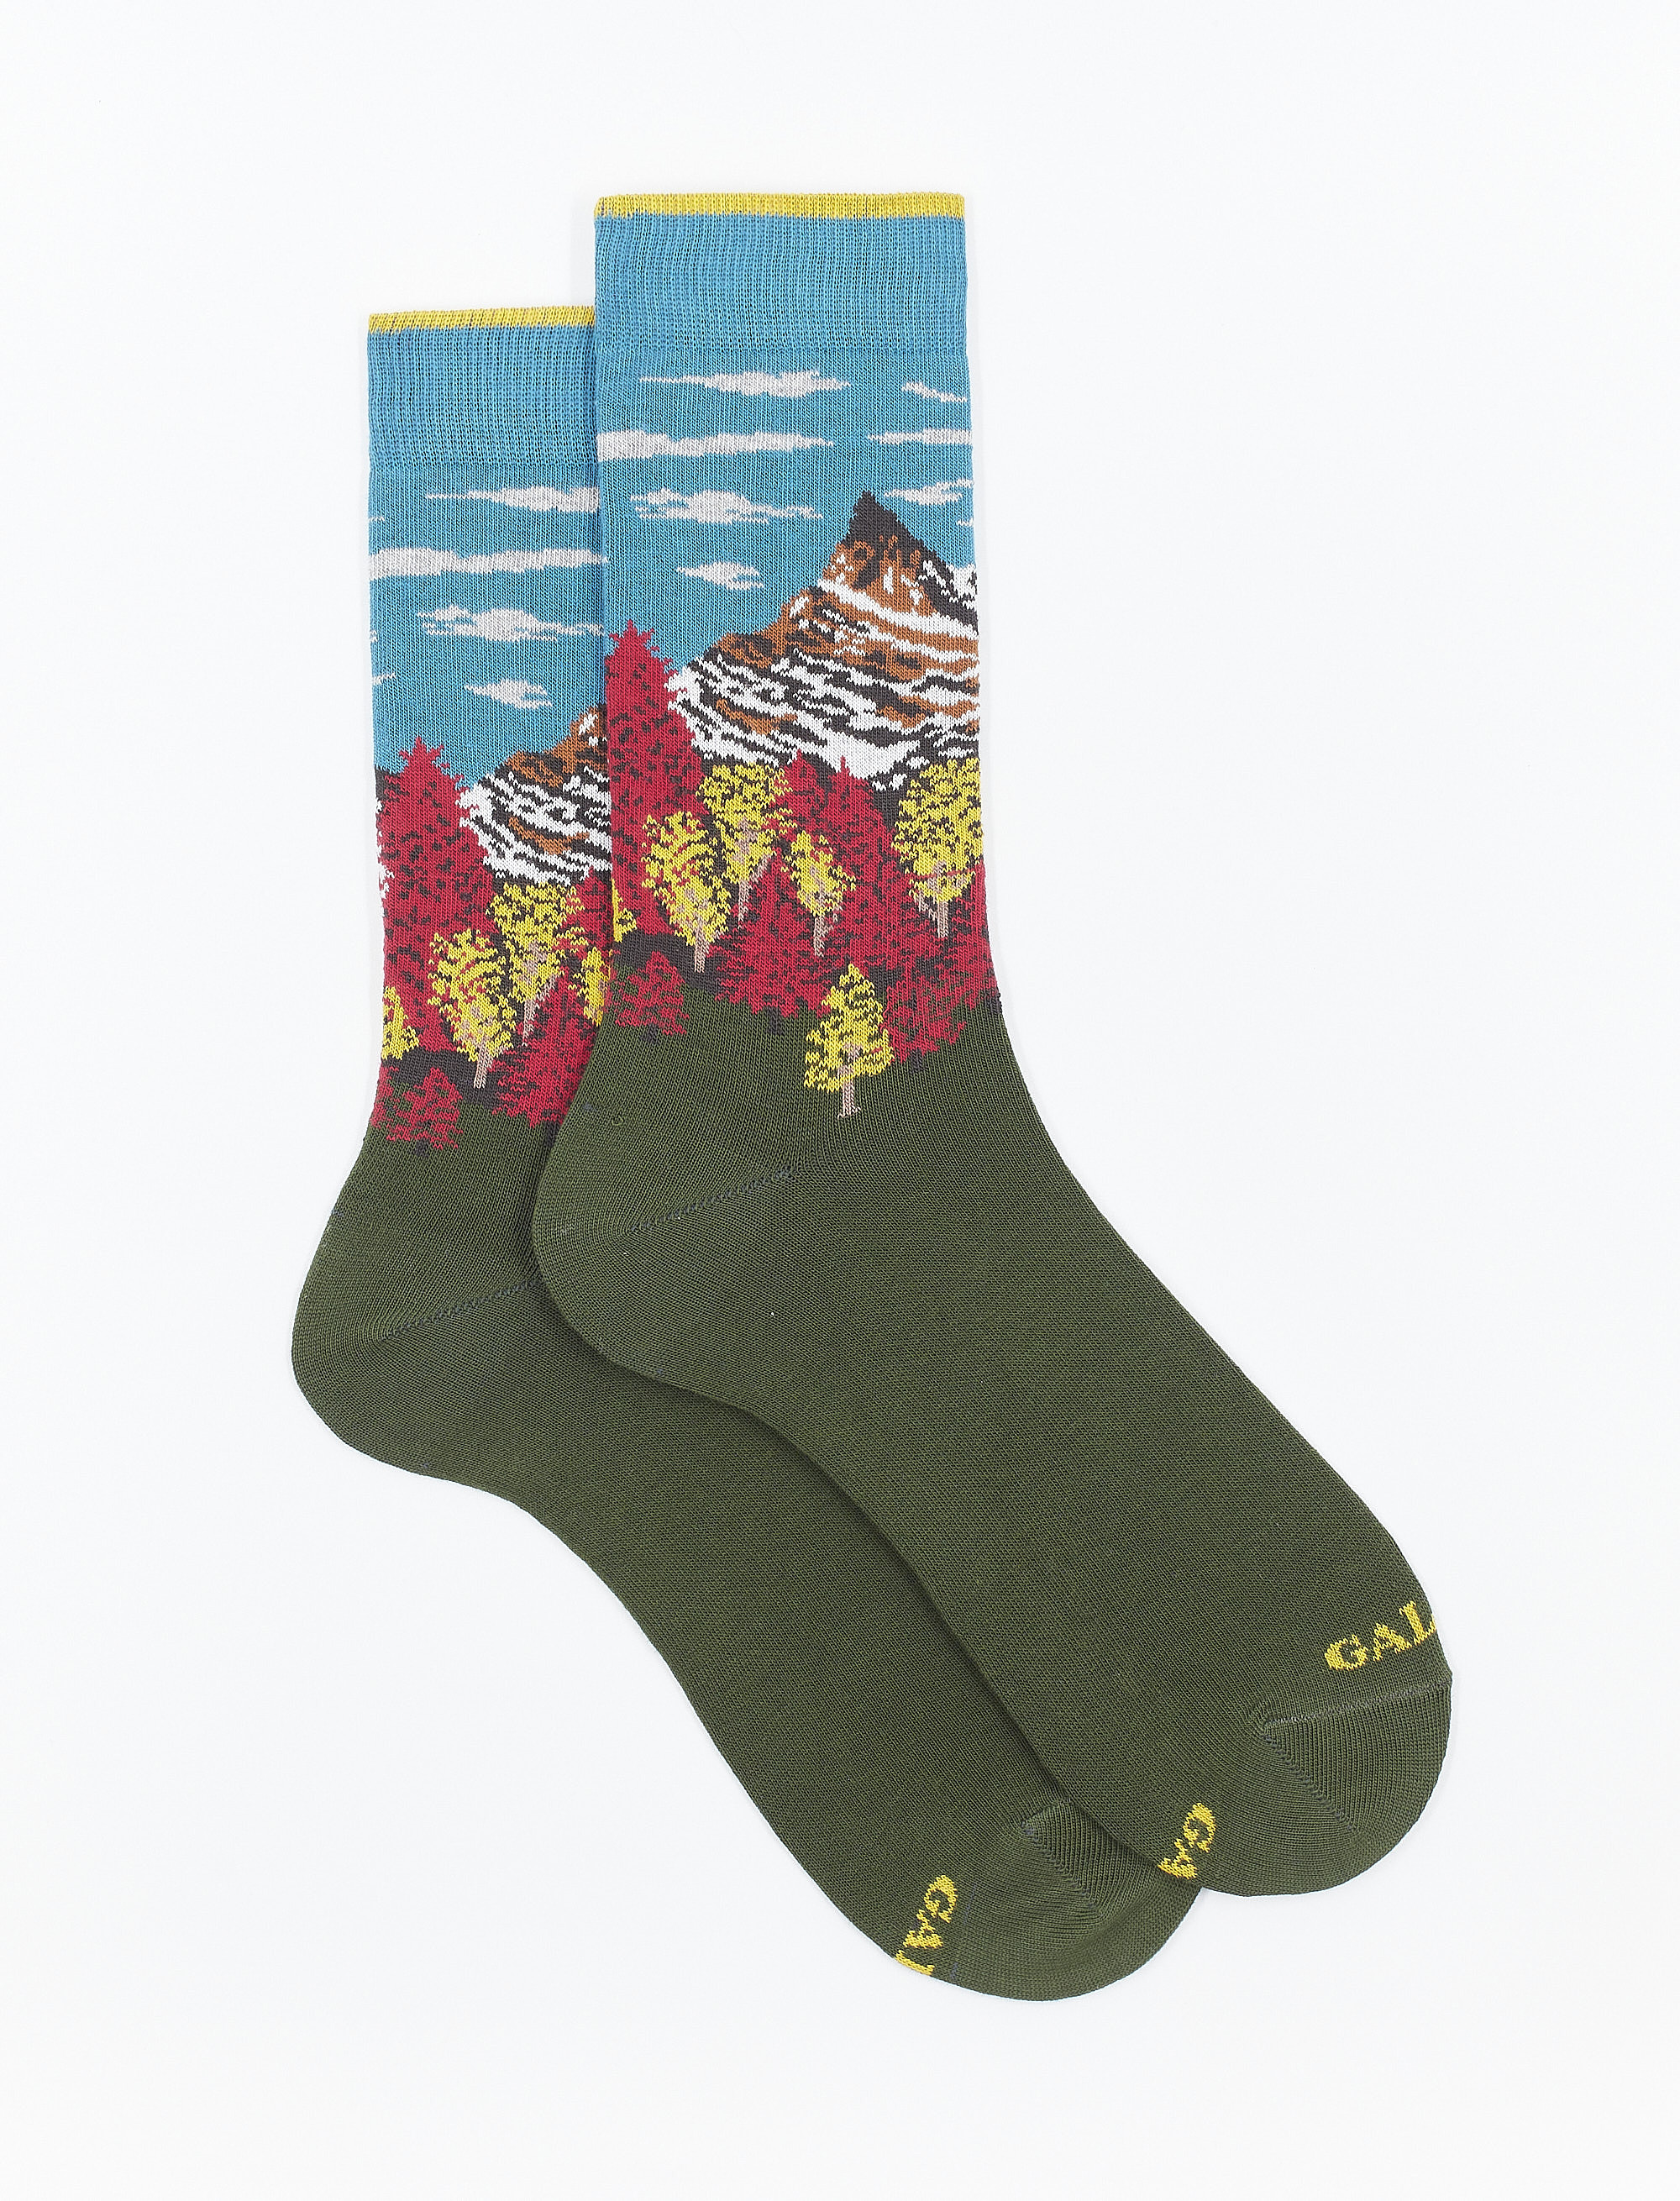 Men's short moss green cotton socks with mountain landscape motif - The FW Edition | Gallo 1927 - Official Online Shop